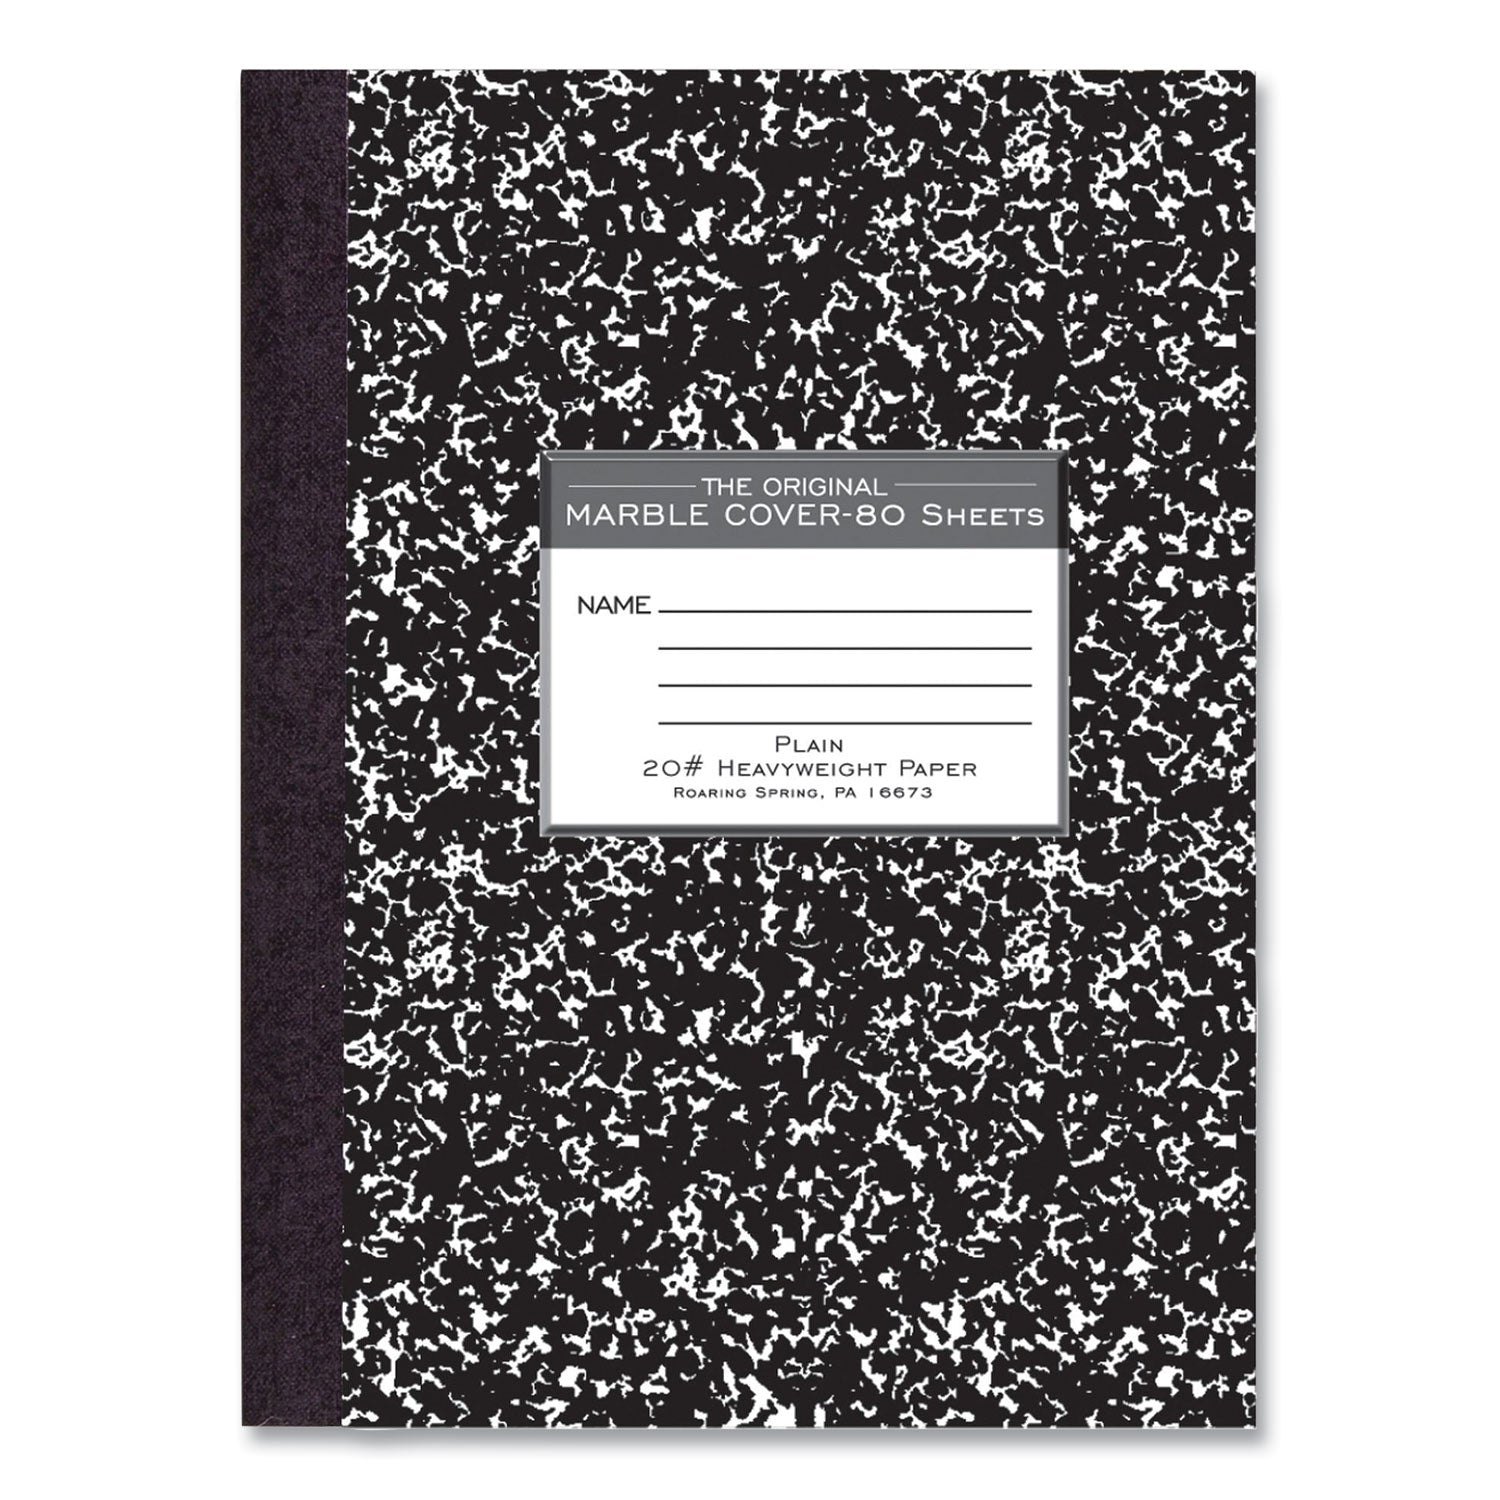 hardcover-marble-composition-book-unruled-black-marble-cover-80-1025-x-788-sheets-24-ct-ships-in-4-6-business-days_roa77479cs - 2